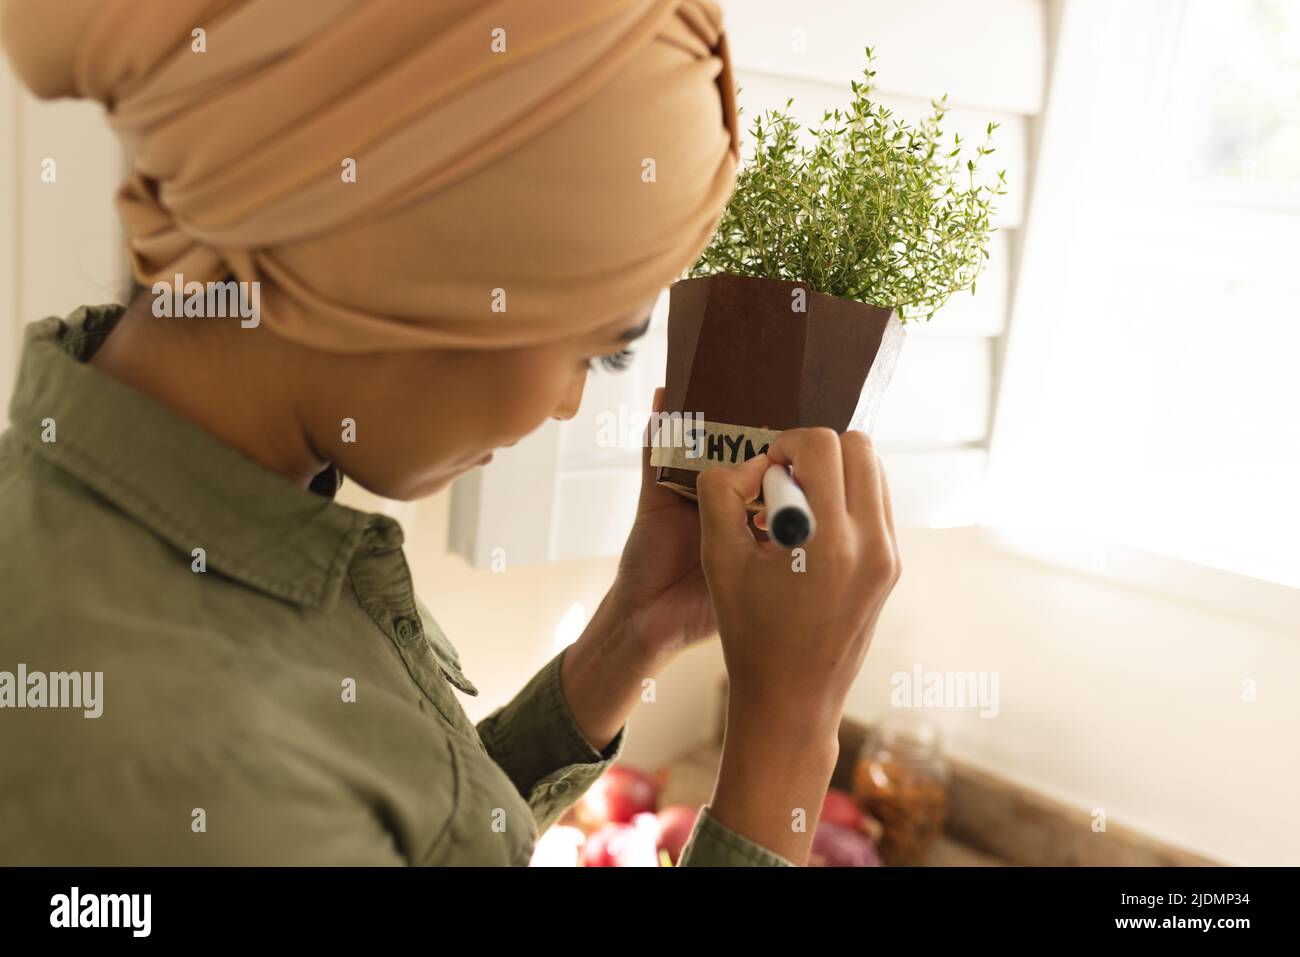 Biracial young woman in hijab labeling pot of thyme plant at home Stock Photo